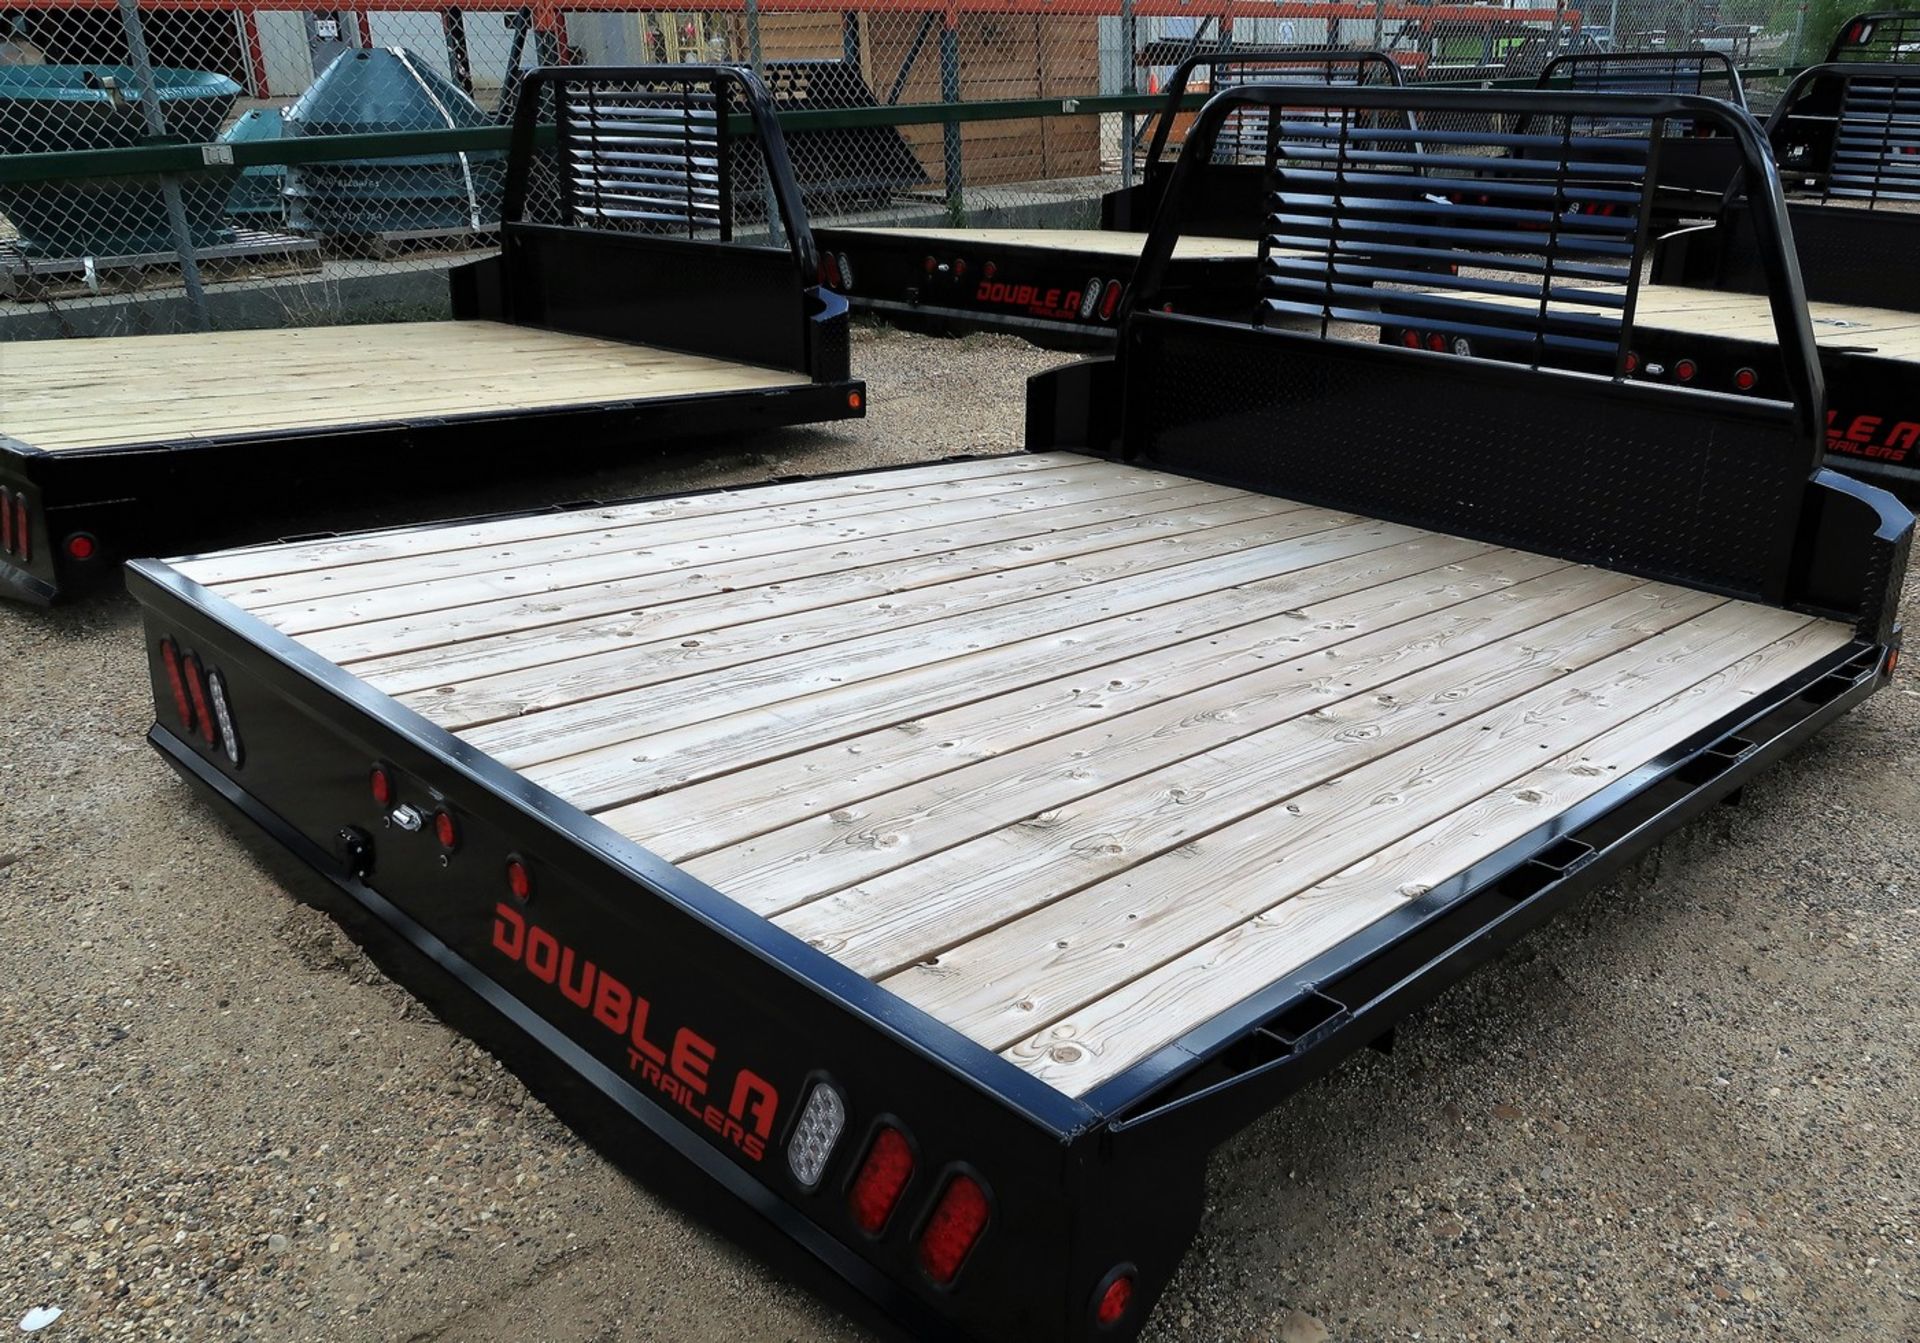 2019 DOUBLE A TRUCK DEC, BOX OFF, 8.5' DECK WOOD DECKING S/N 2DATDOK1046 - Image 2 of 3